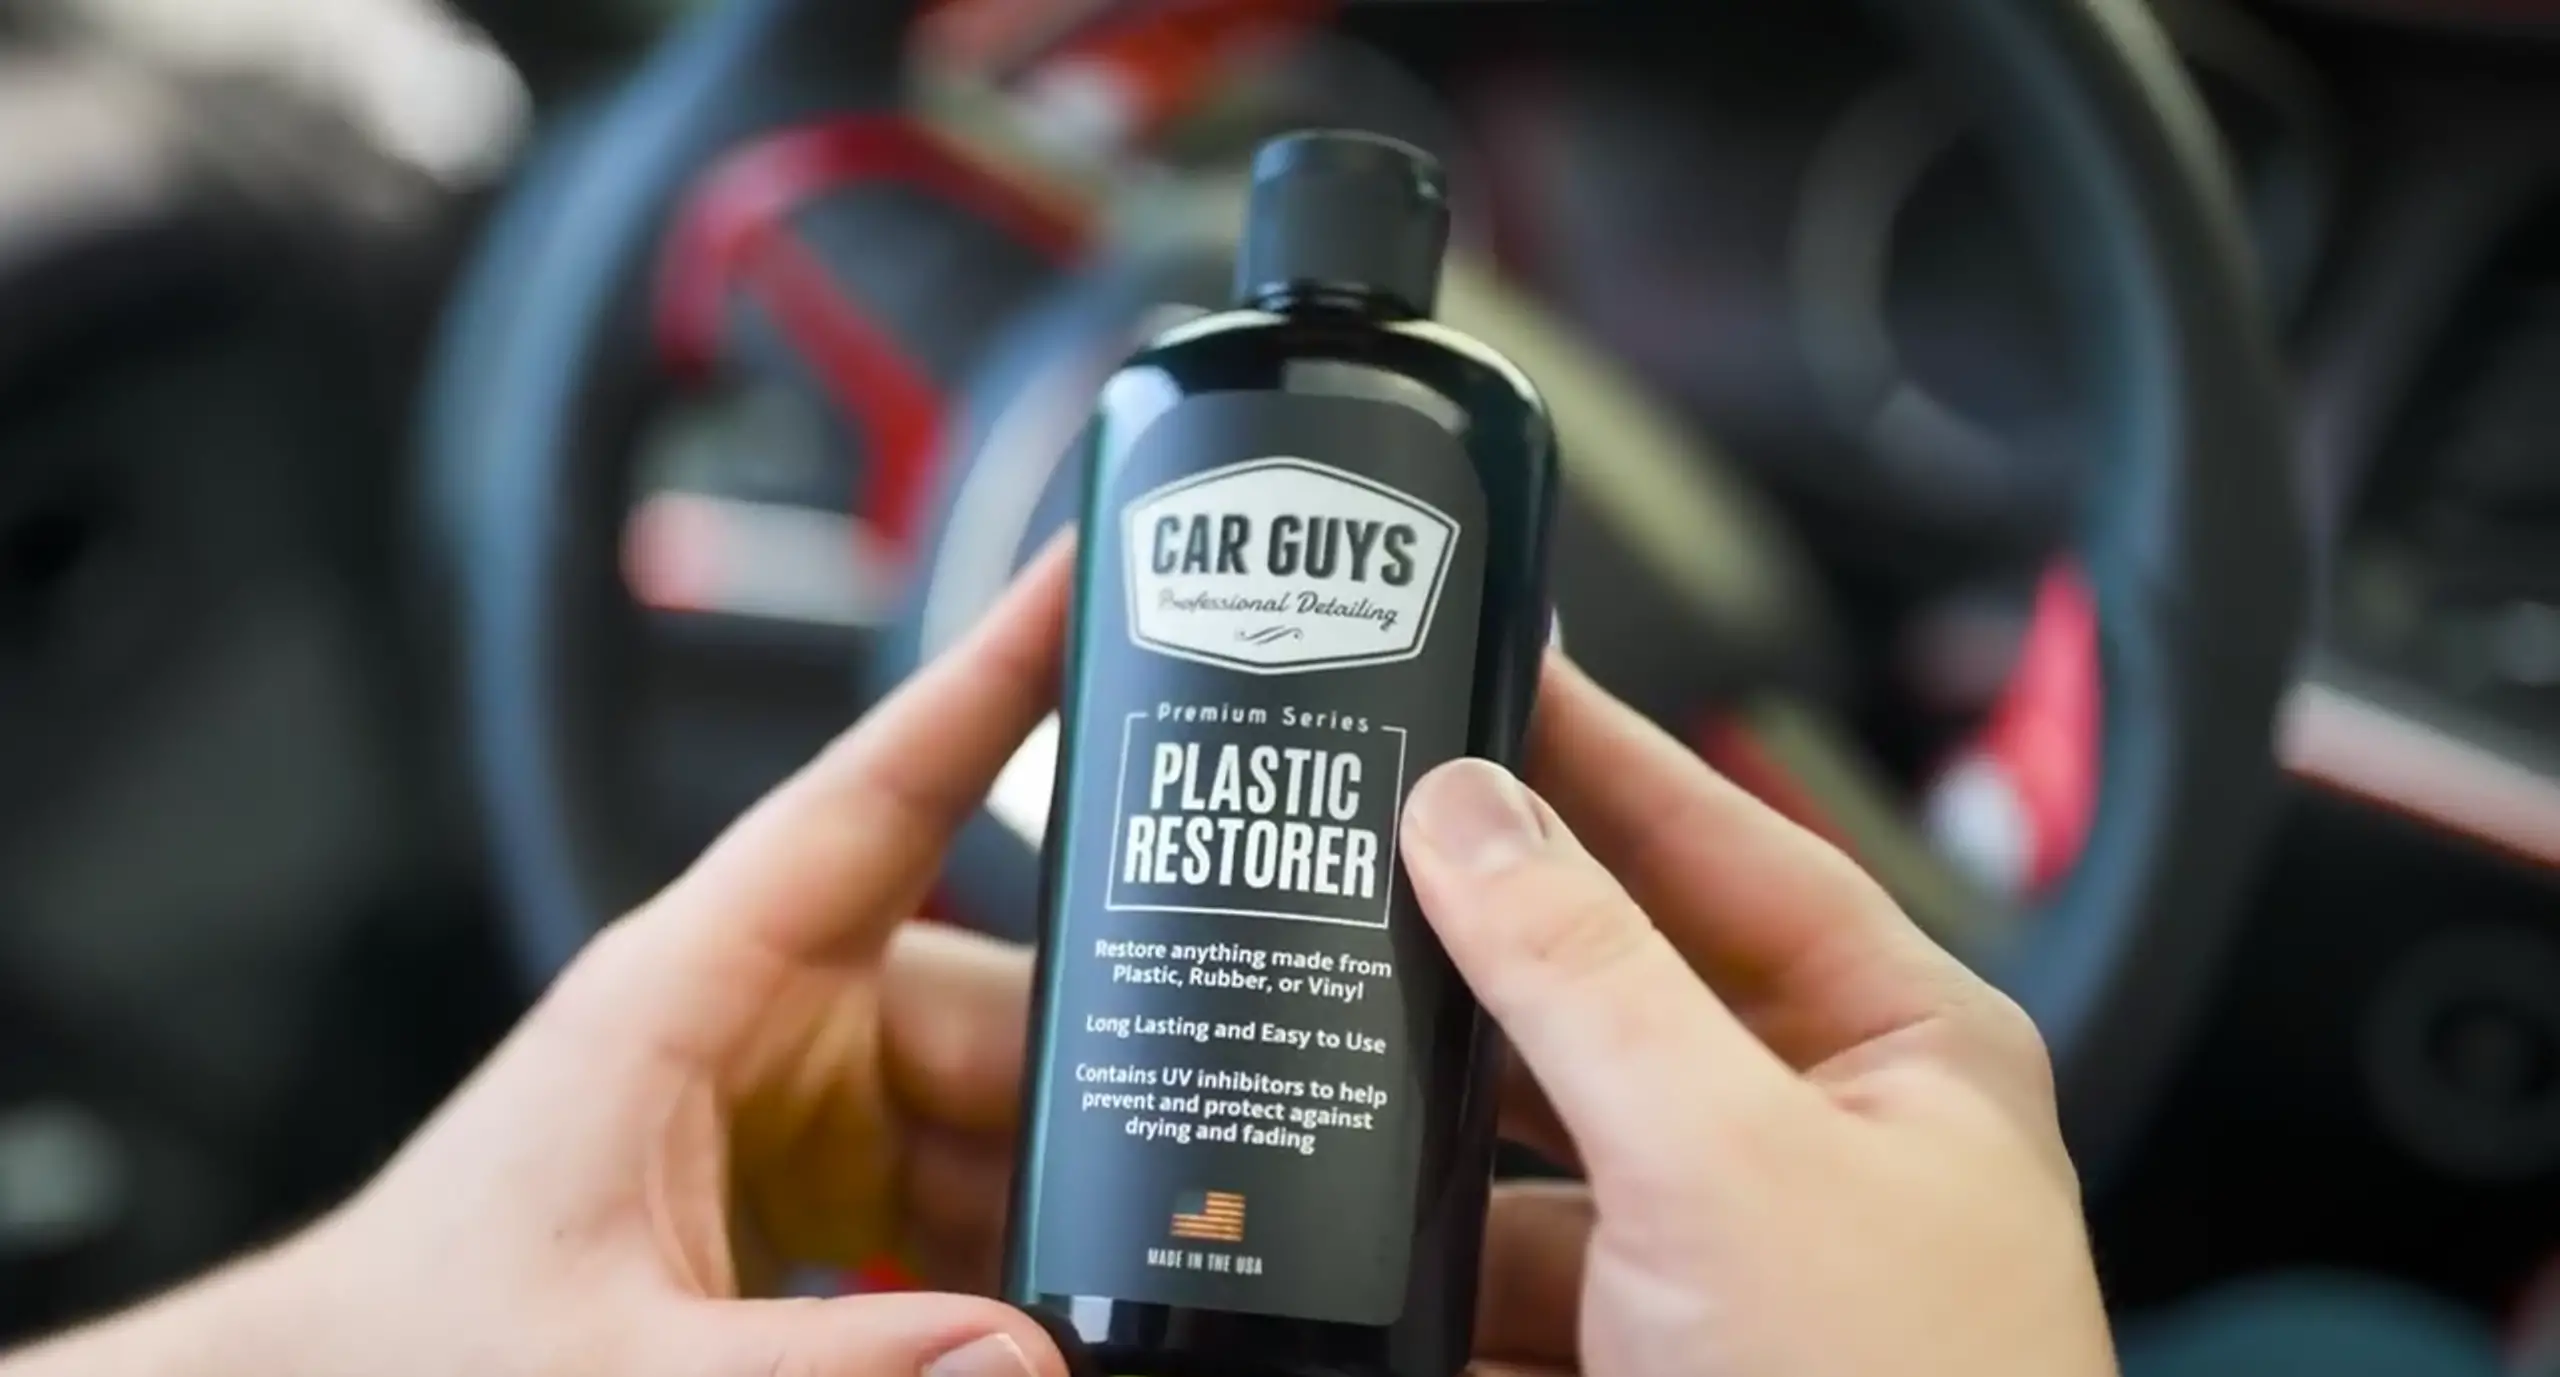 Car Guys Plastic Restorer, Review & Opinion